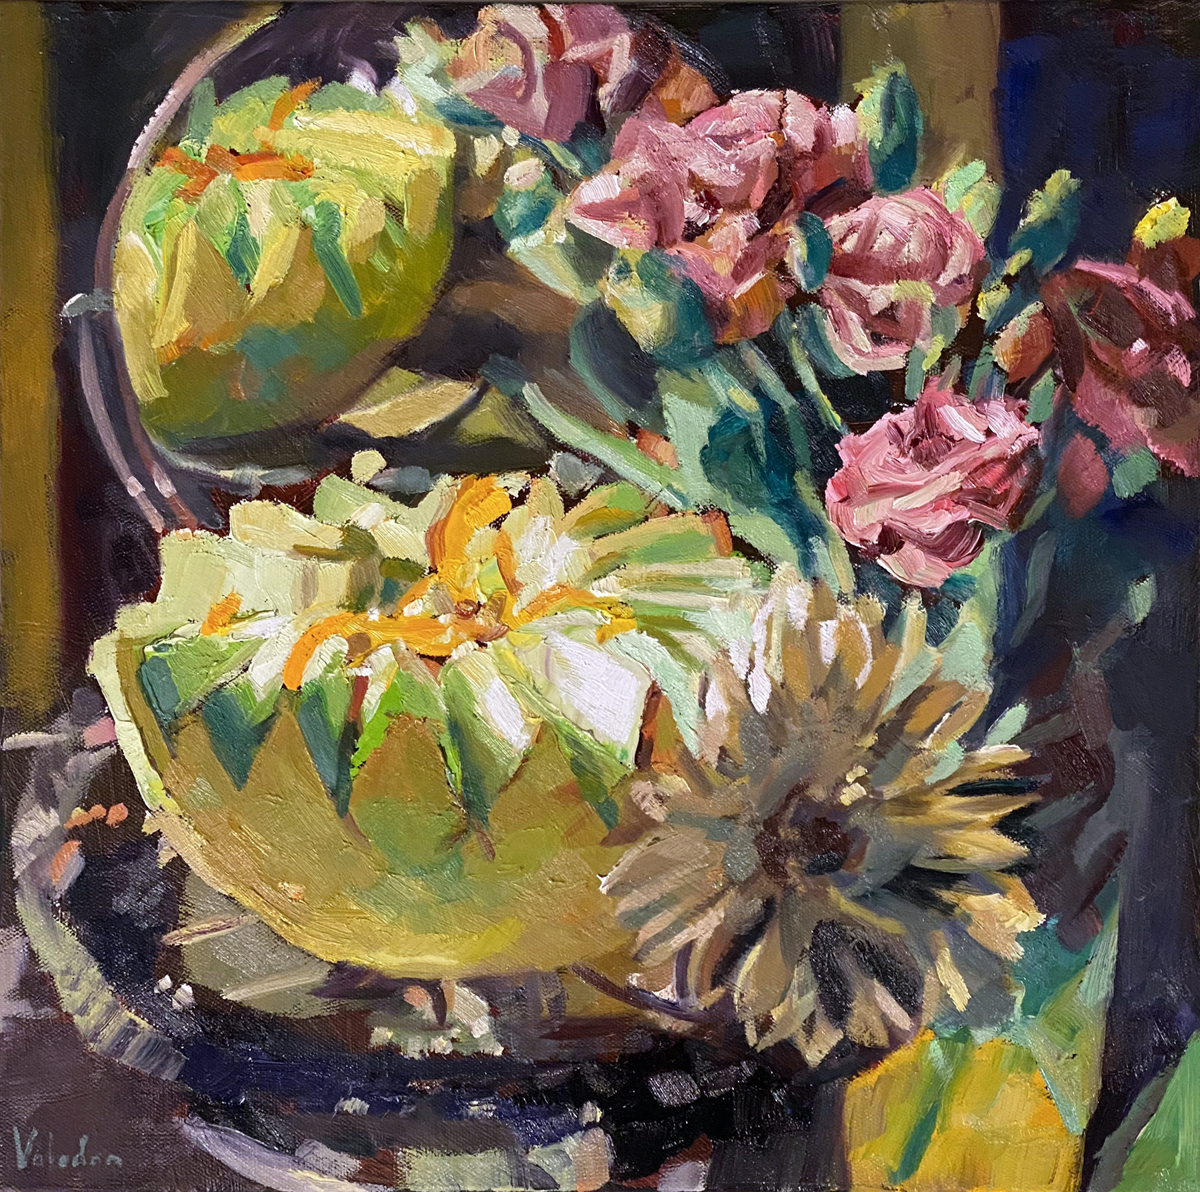 Rosemary Valadon 'Honeydew and Roses' oil on canvas 40 x 40cm